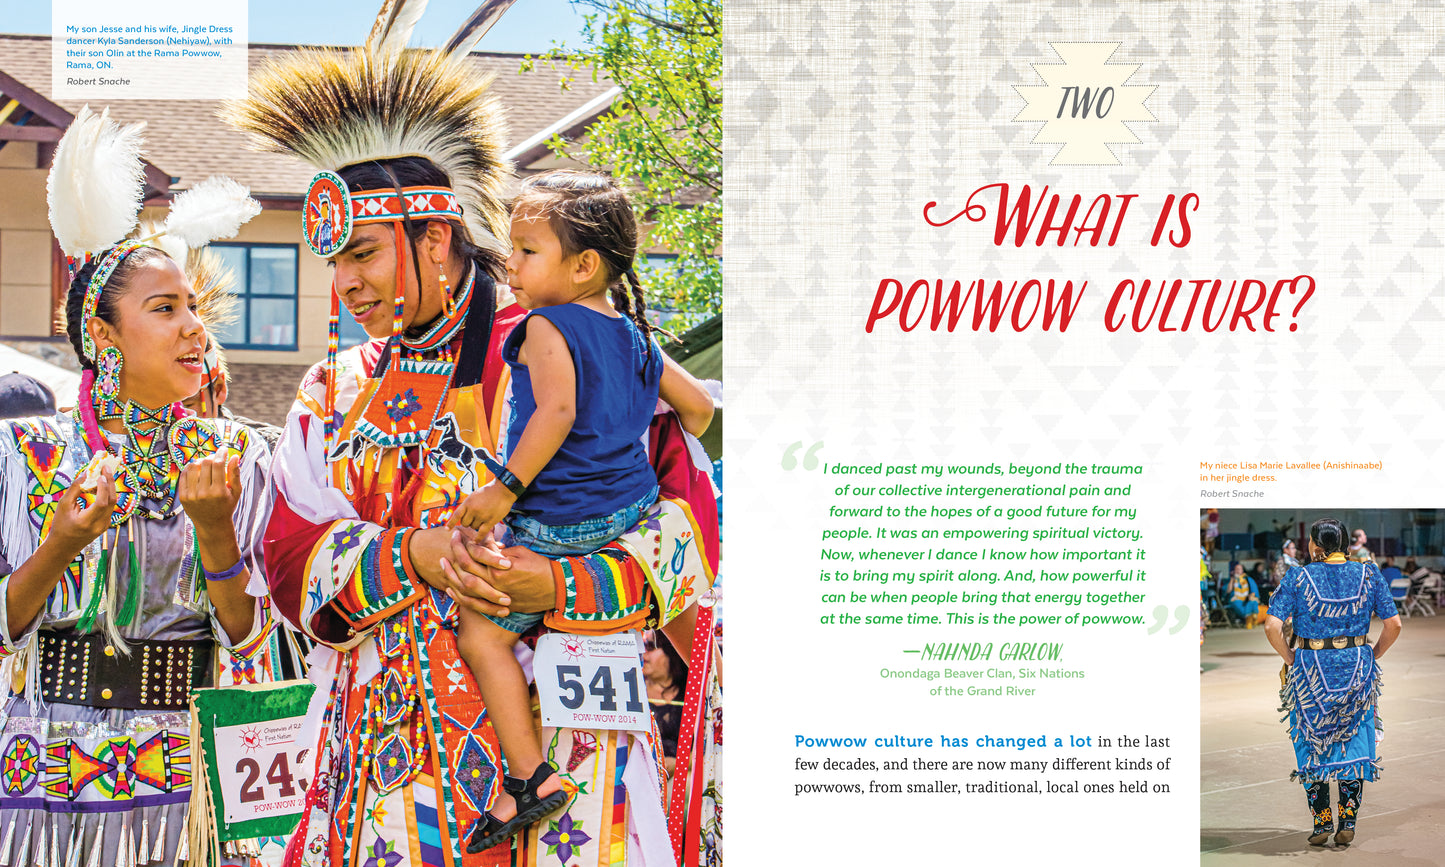 Powwow-A Celebration through Song and Dance